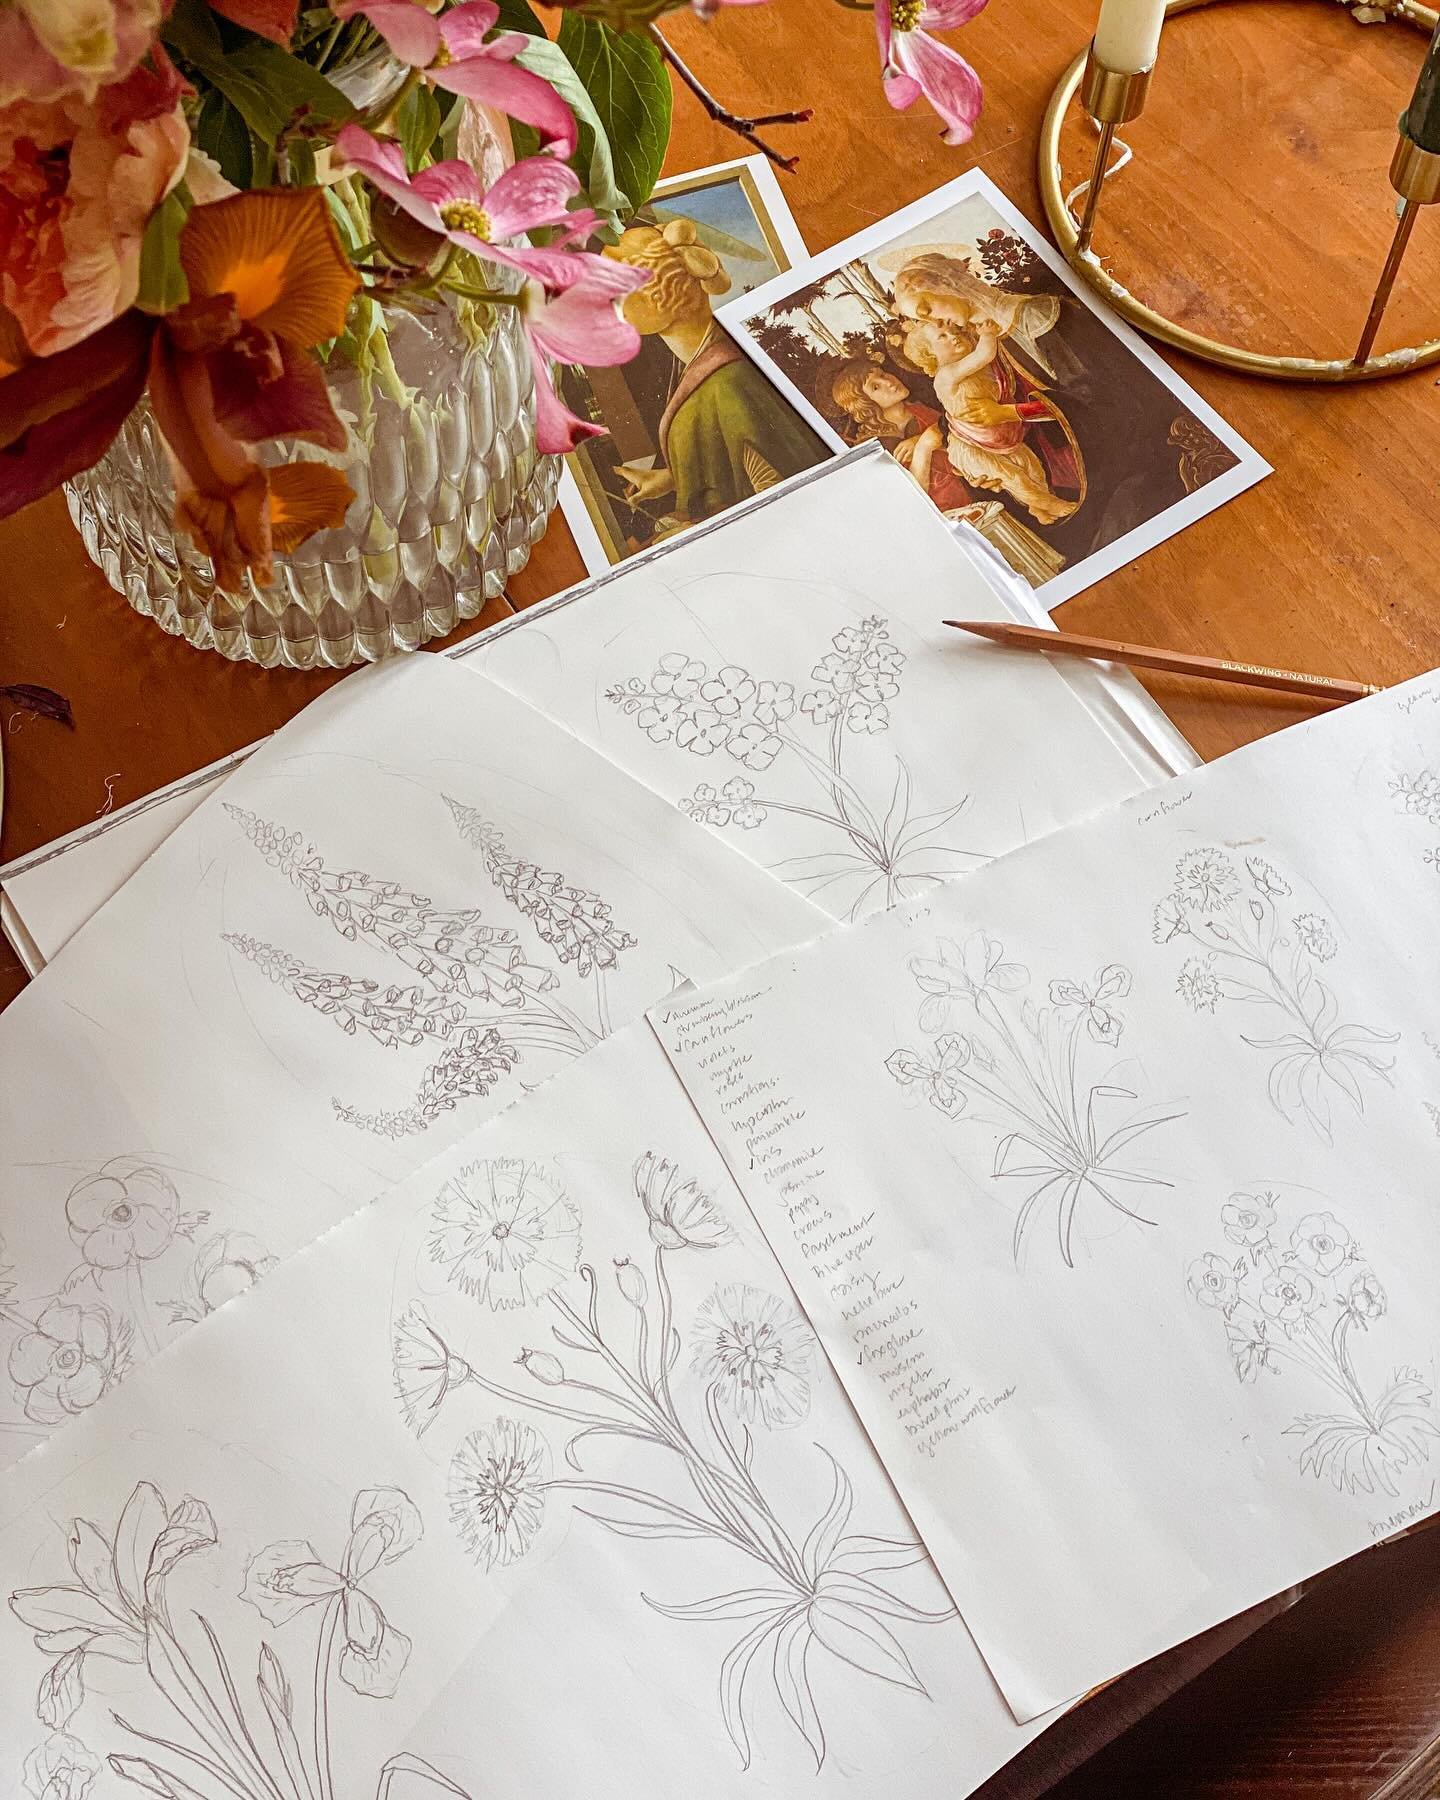 Balancing the planned with the play. Enjoying some quiet and extra drawing time this week. 
.
.
#remusedstudio #surfacepatterndesign #botanicalillustration #inspiredbypetals #floralart #workinprogress #sketchbook